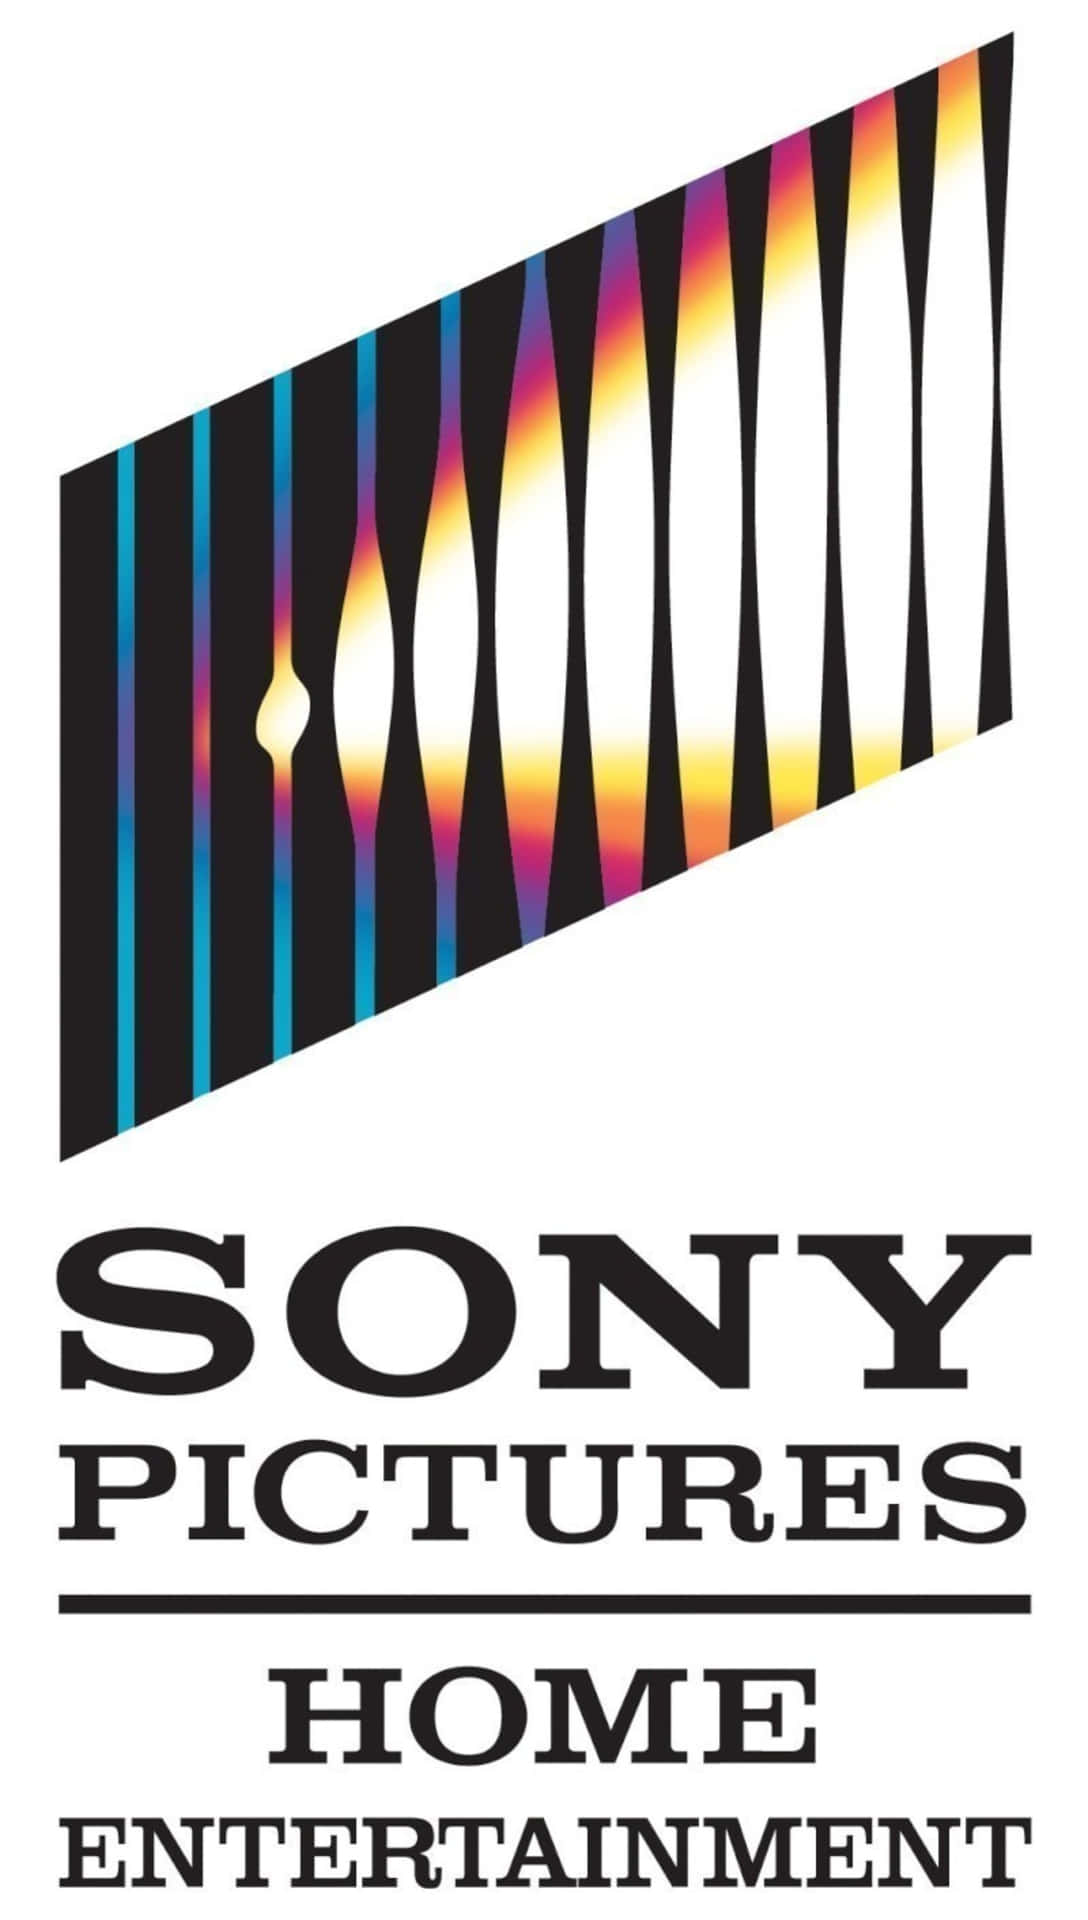 Sonypictures Is A Well-known Film And Television Production Company. It Is Not Related To Computer Or Mobile Wallpapers.